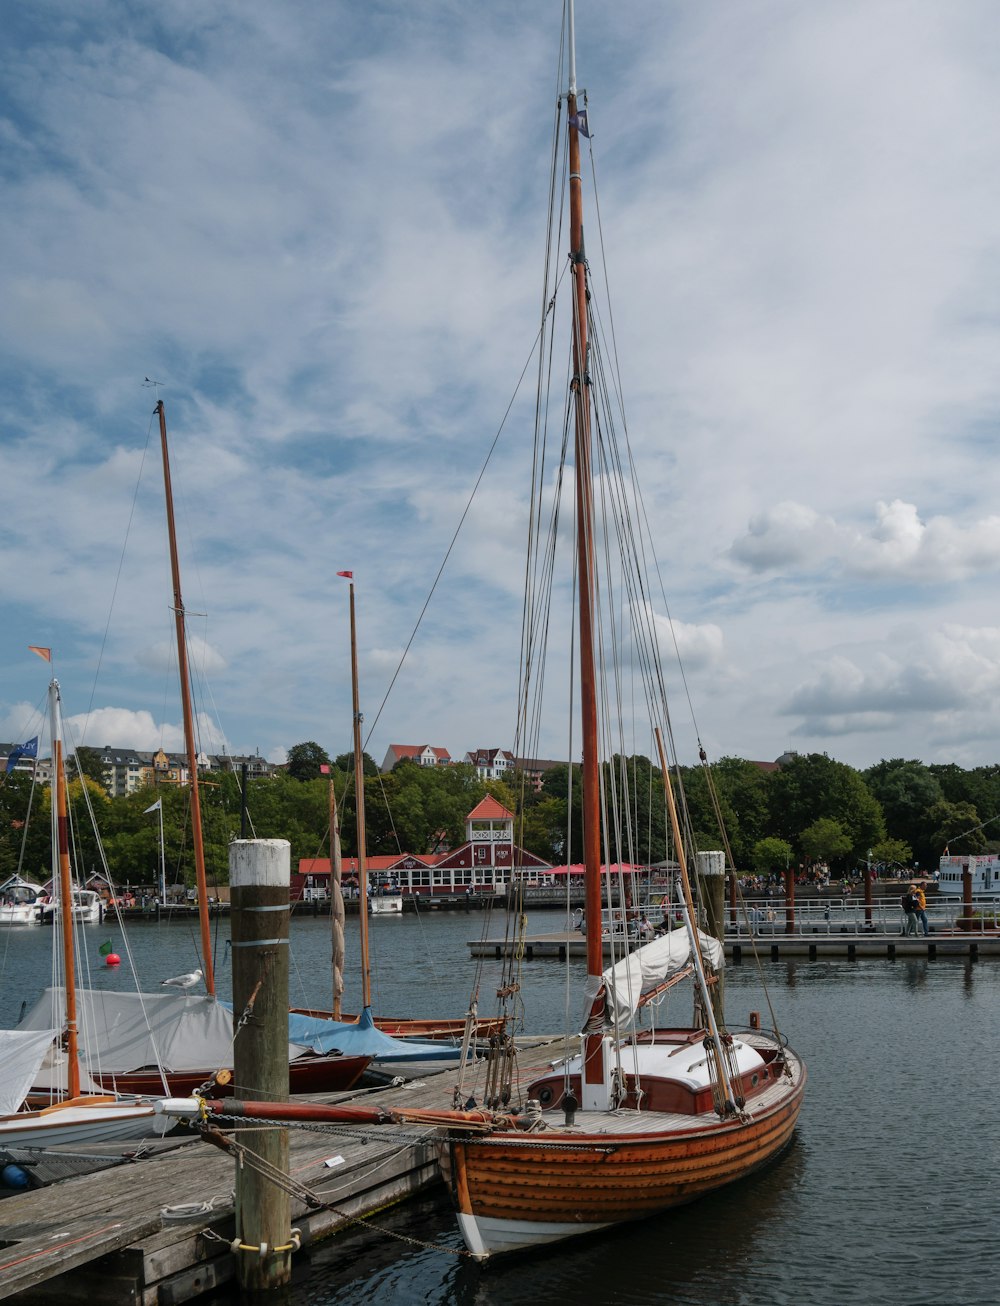 a sailboat docked at a pier with other boats